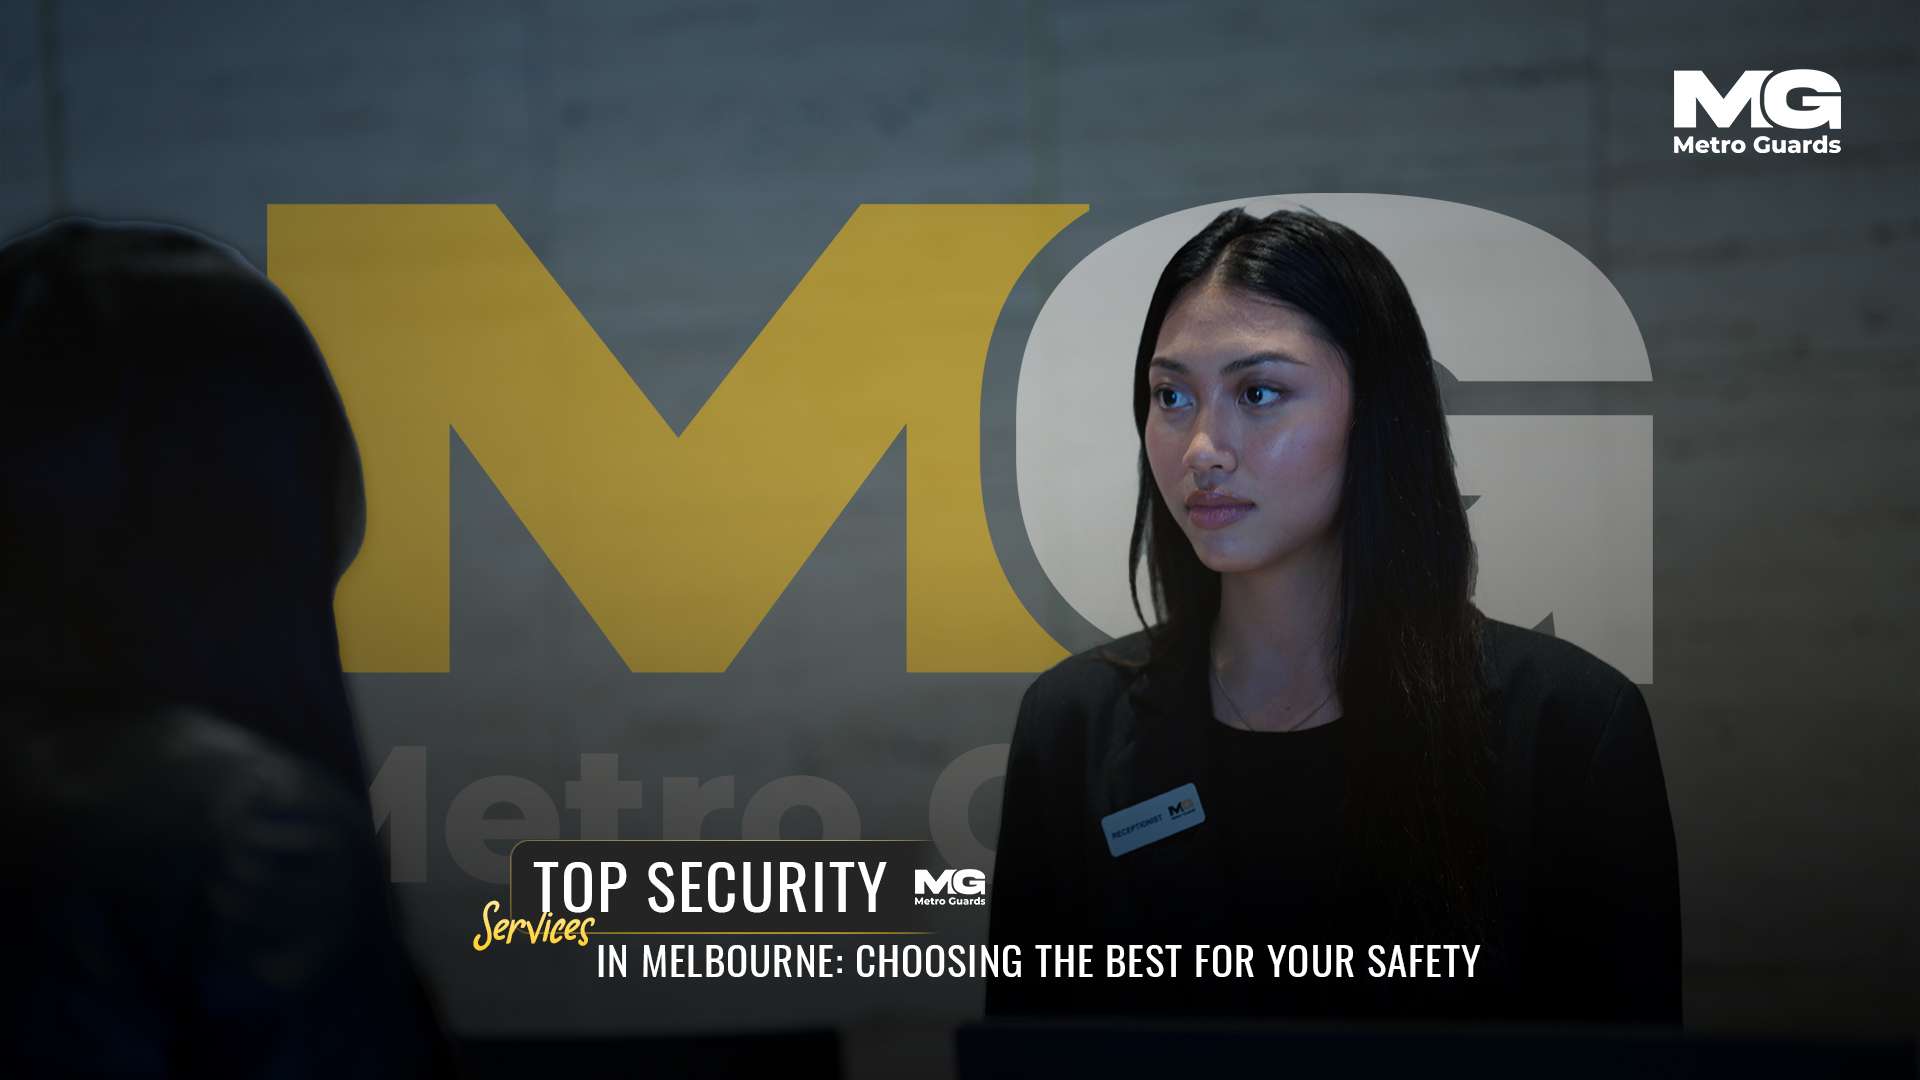 Top Security Services in Melbourne: Choosing the Best for Your Safety